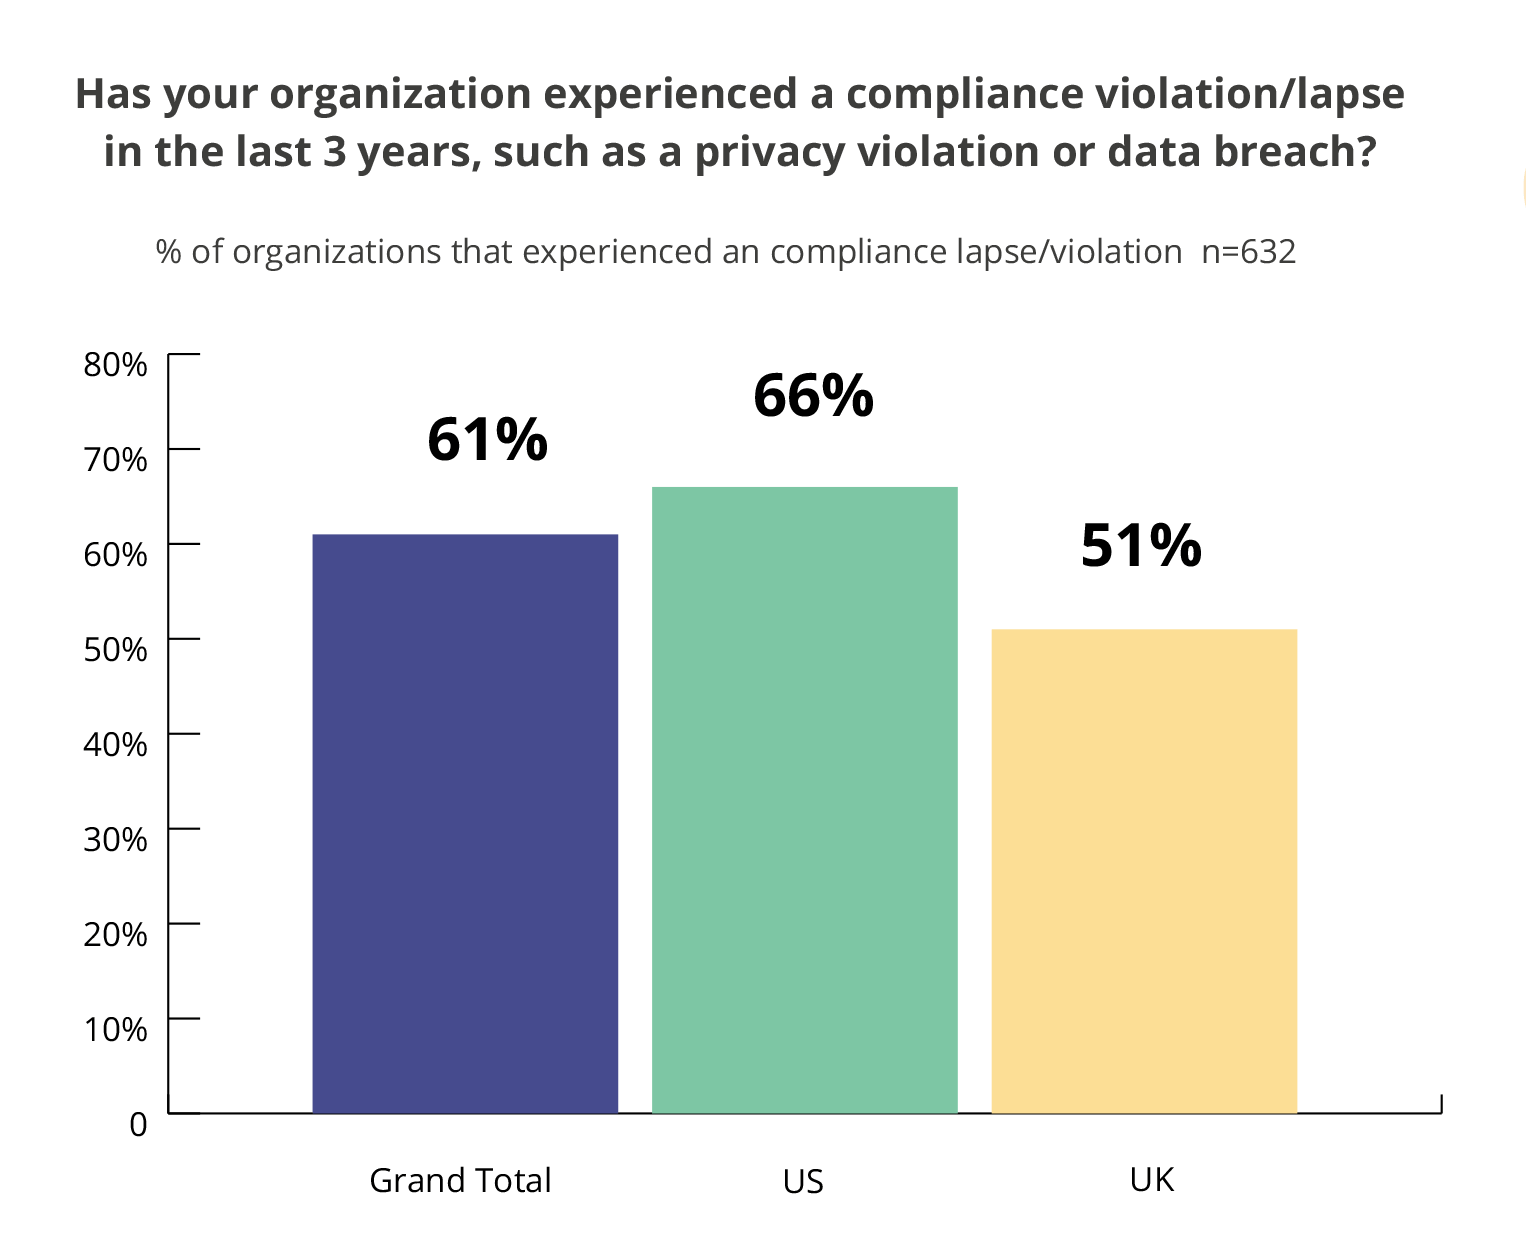 Has your organization experienced a compliance violation/lapse in the last 3 years, such as a privacy violation or data breach?